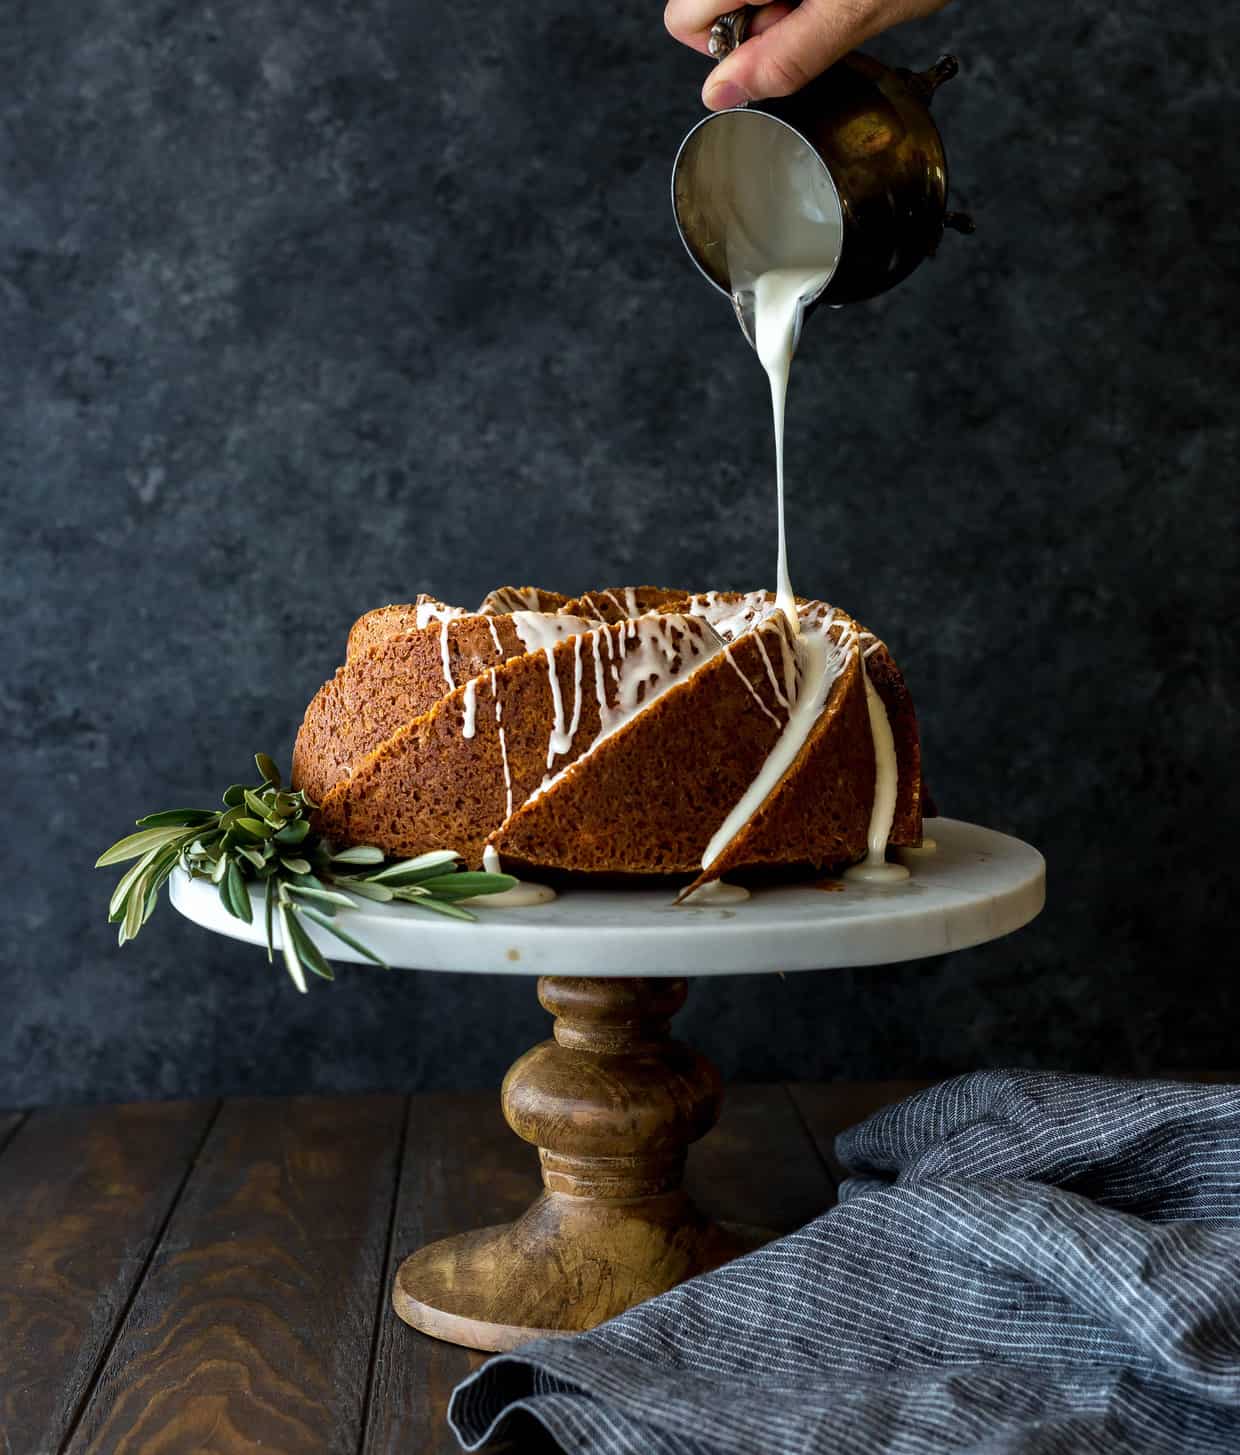 A beautiful gingerbread bundt cake on a cake stand, with olive branches laying at the base of the cake.